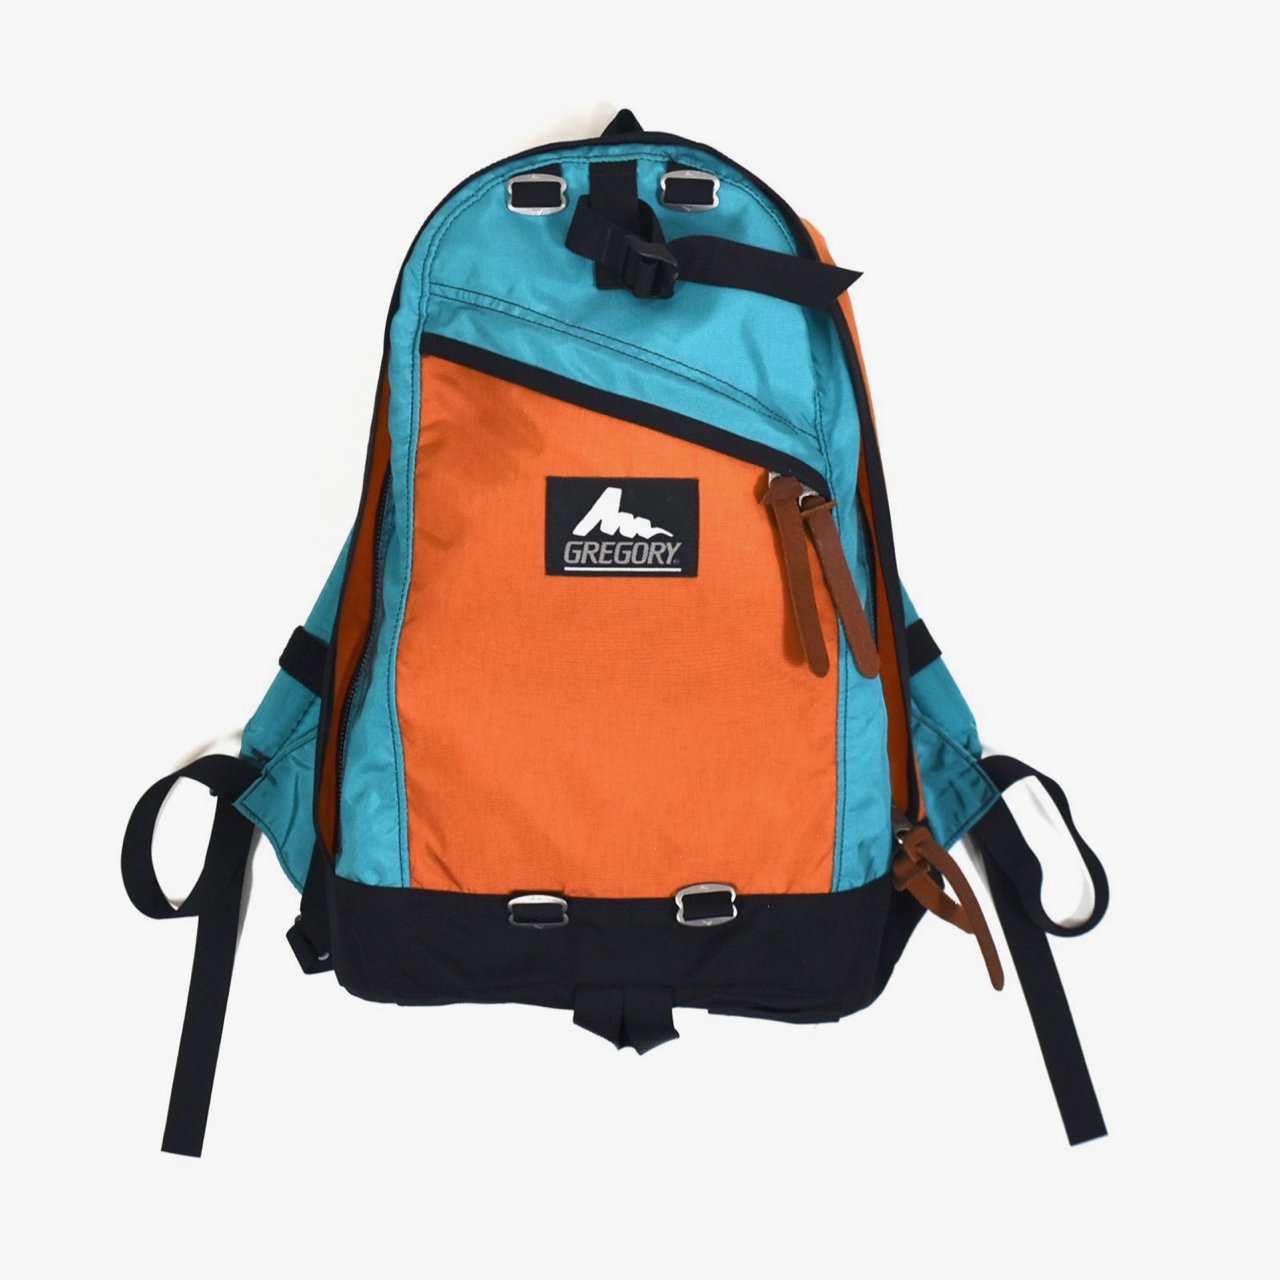 2000s GREGORY Daypack MADE IN USA Turquoise blueOrange